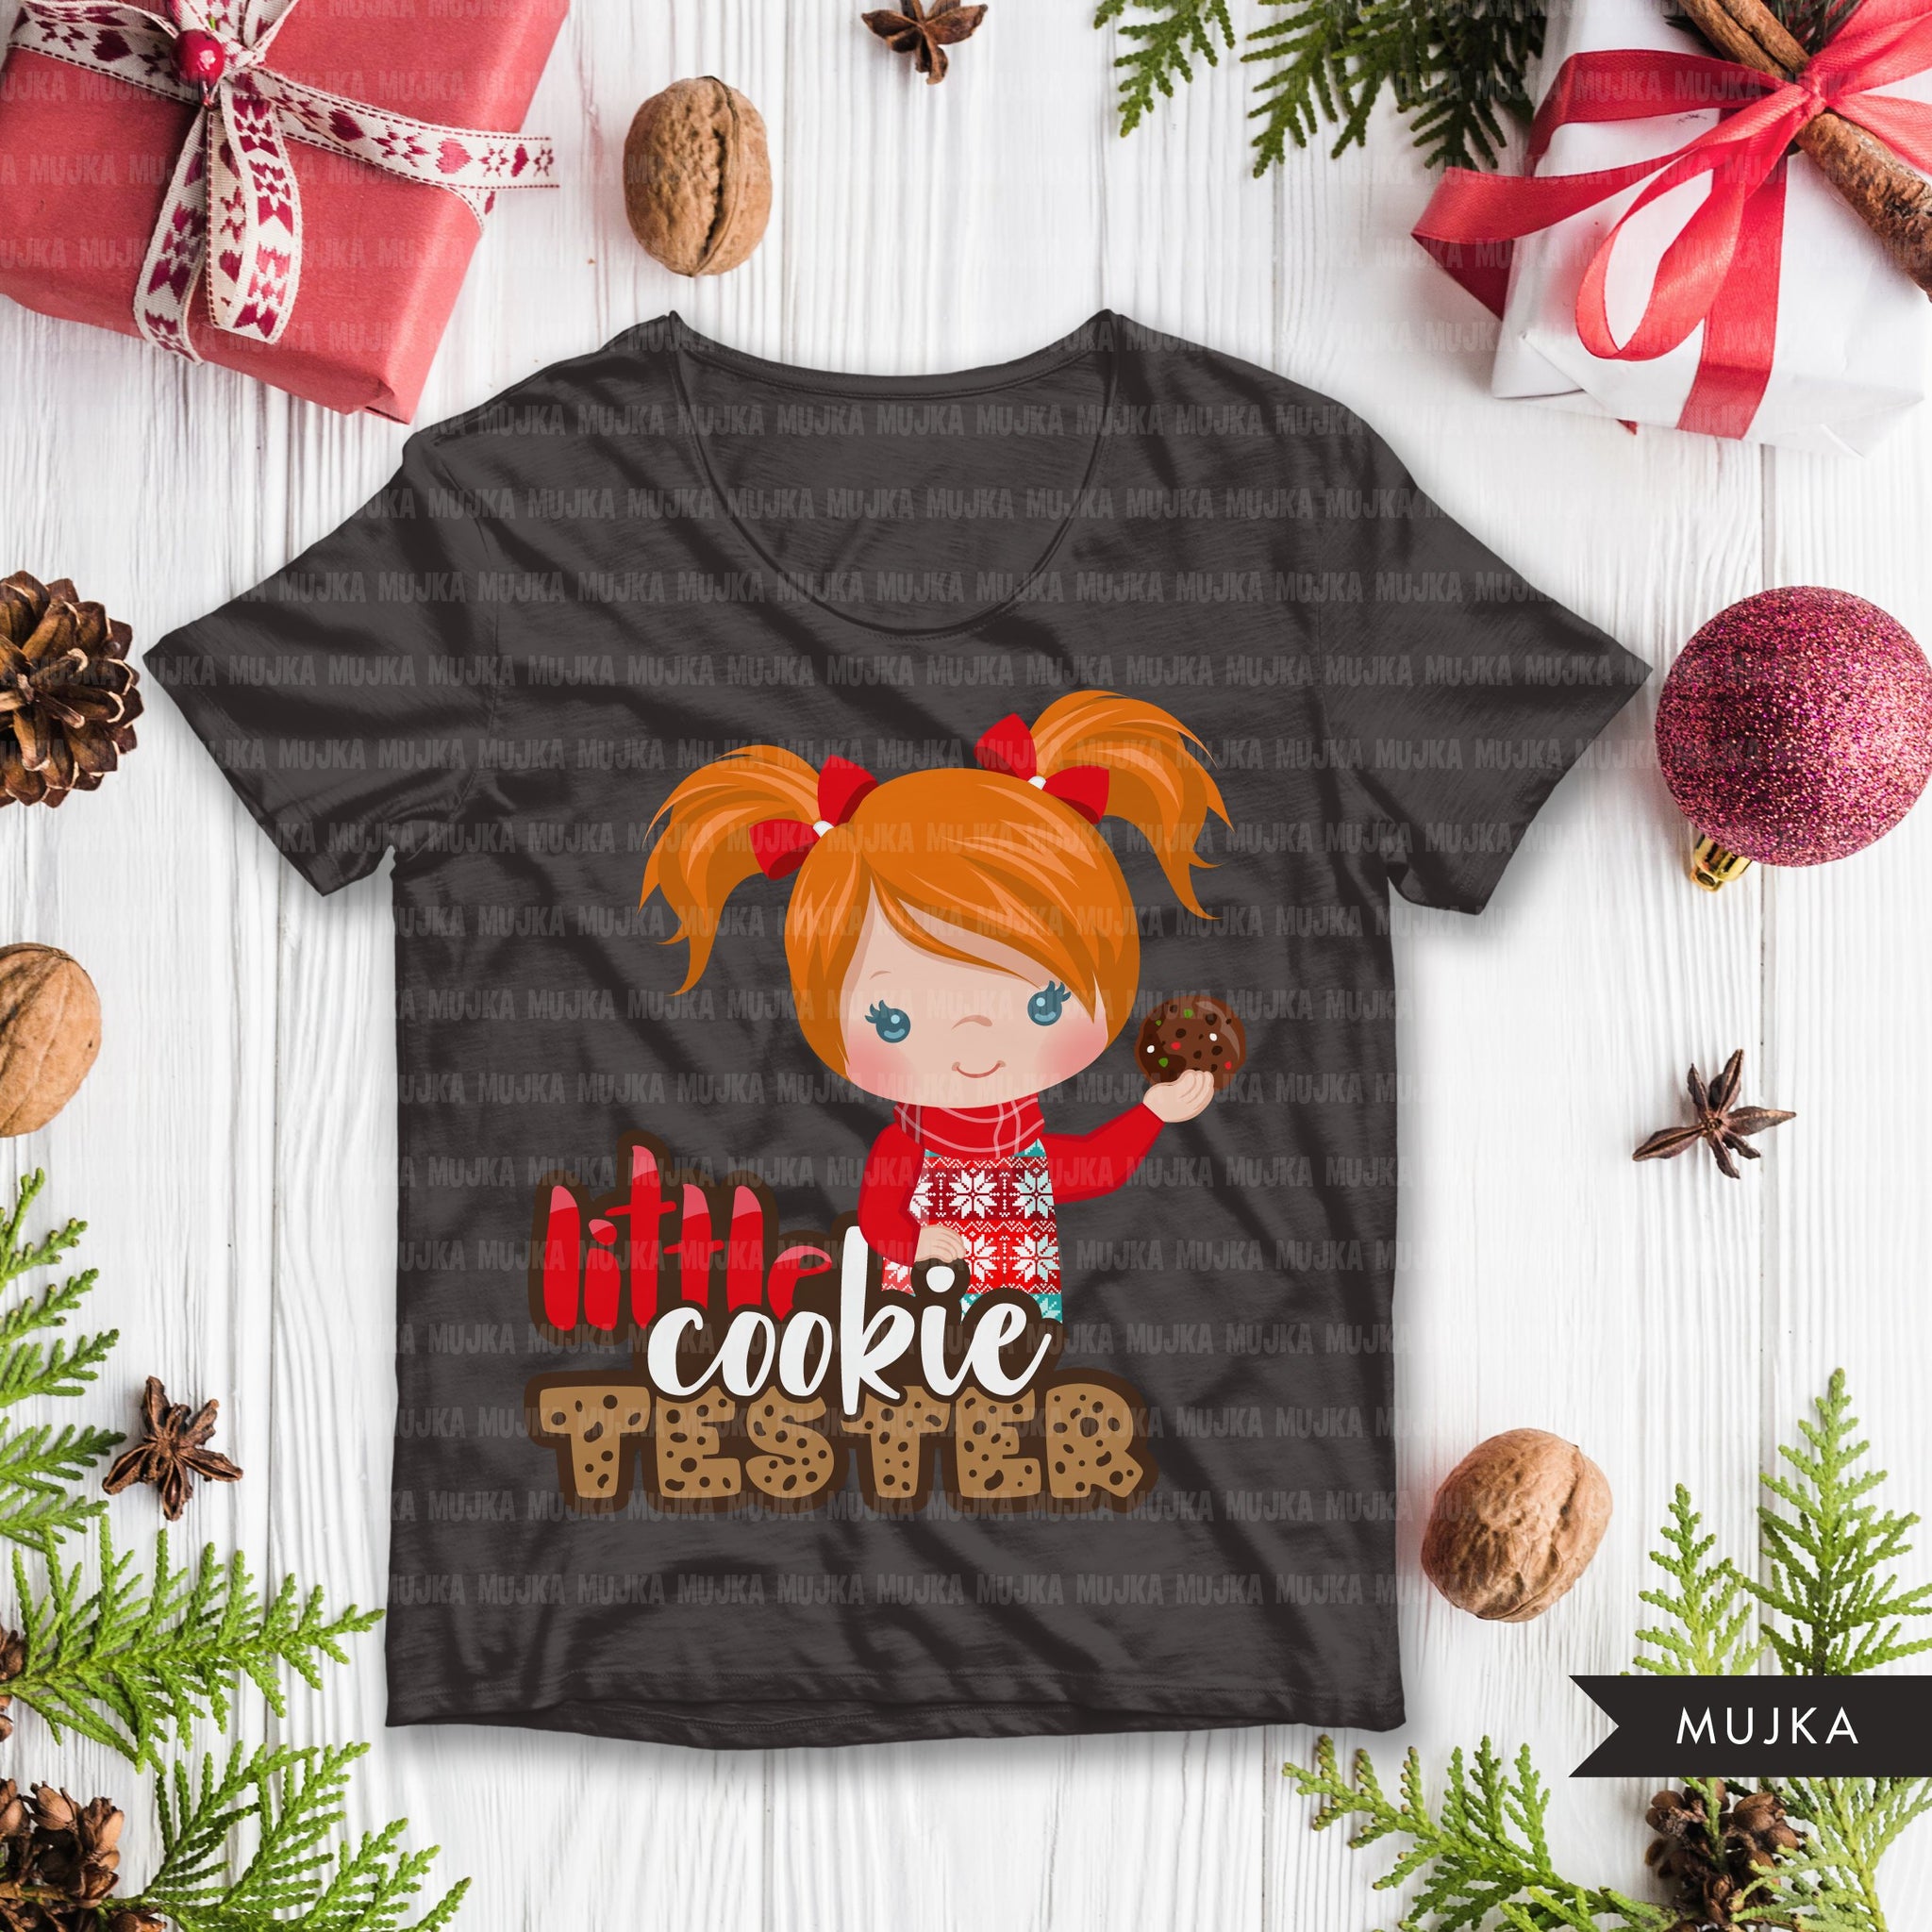 Christmas PNG digital, Little cookie Tester Printable HTV sublimation image transfer clipart, t-shirt girl graphics